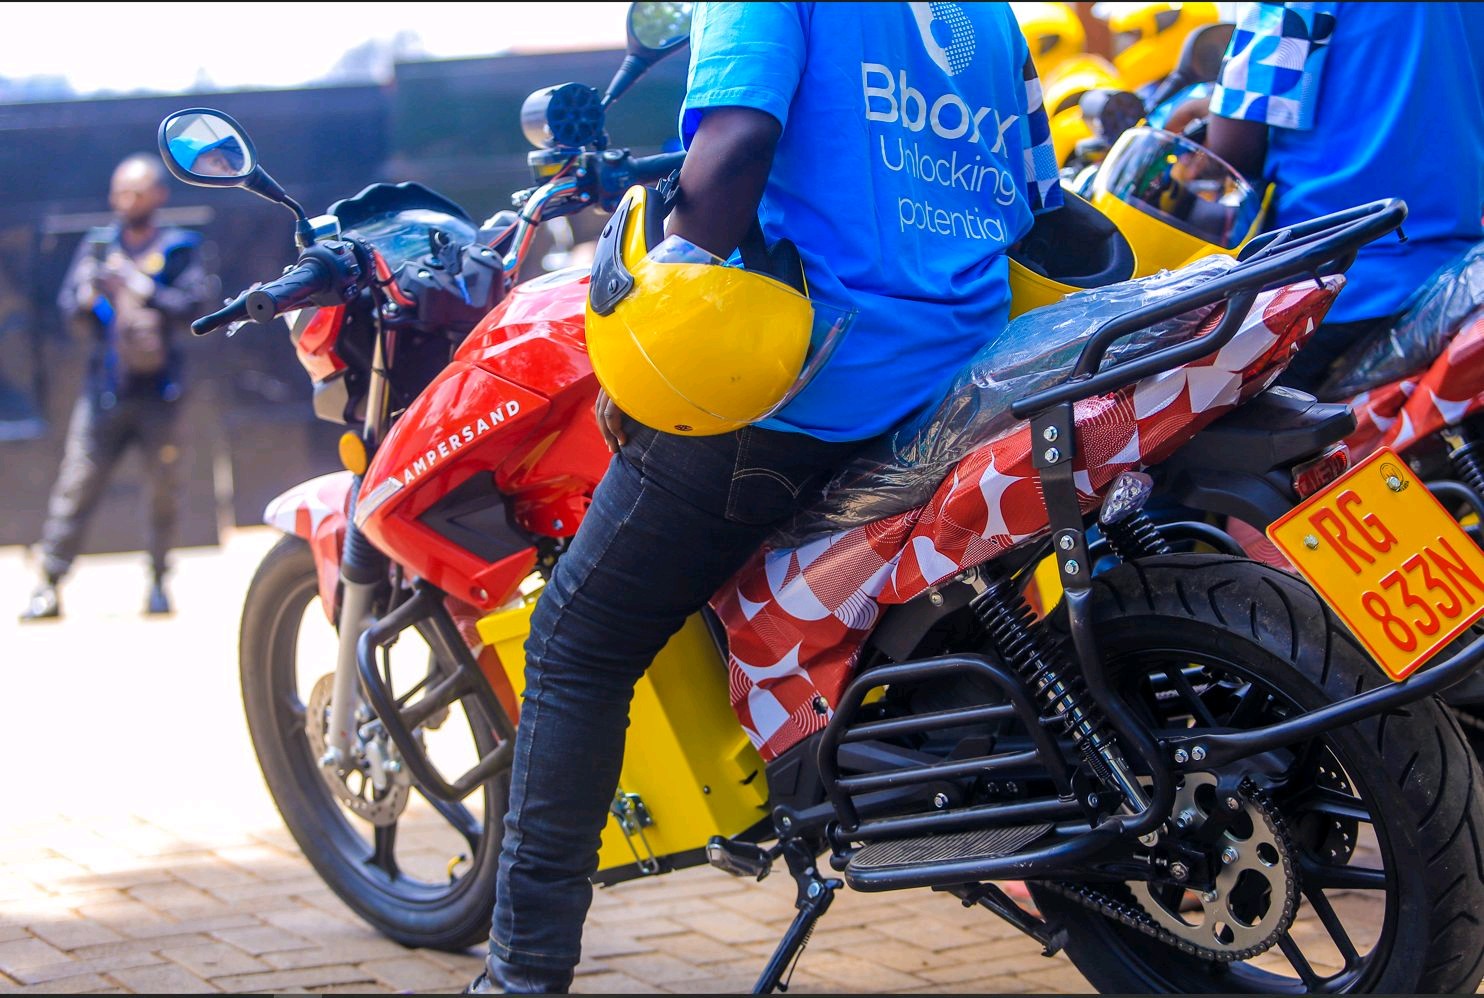 Bboxx Partners With Ampersand To Provide Thousands Of Electric Motorcycle Taxis For Riders In Rwanda